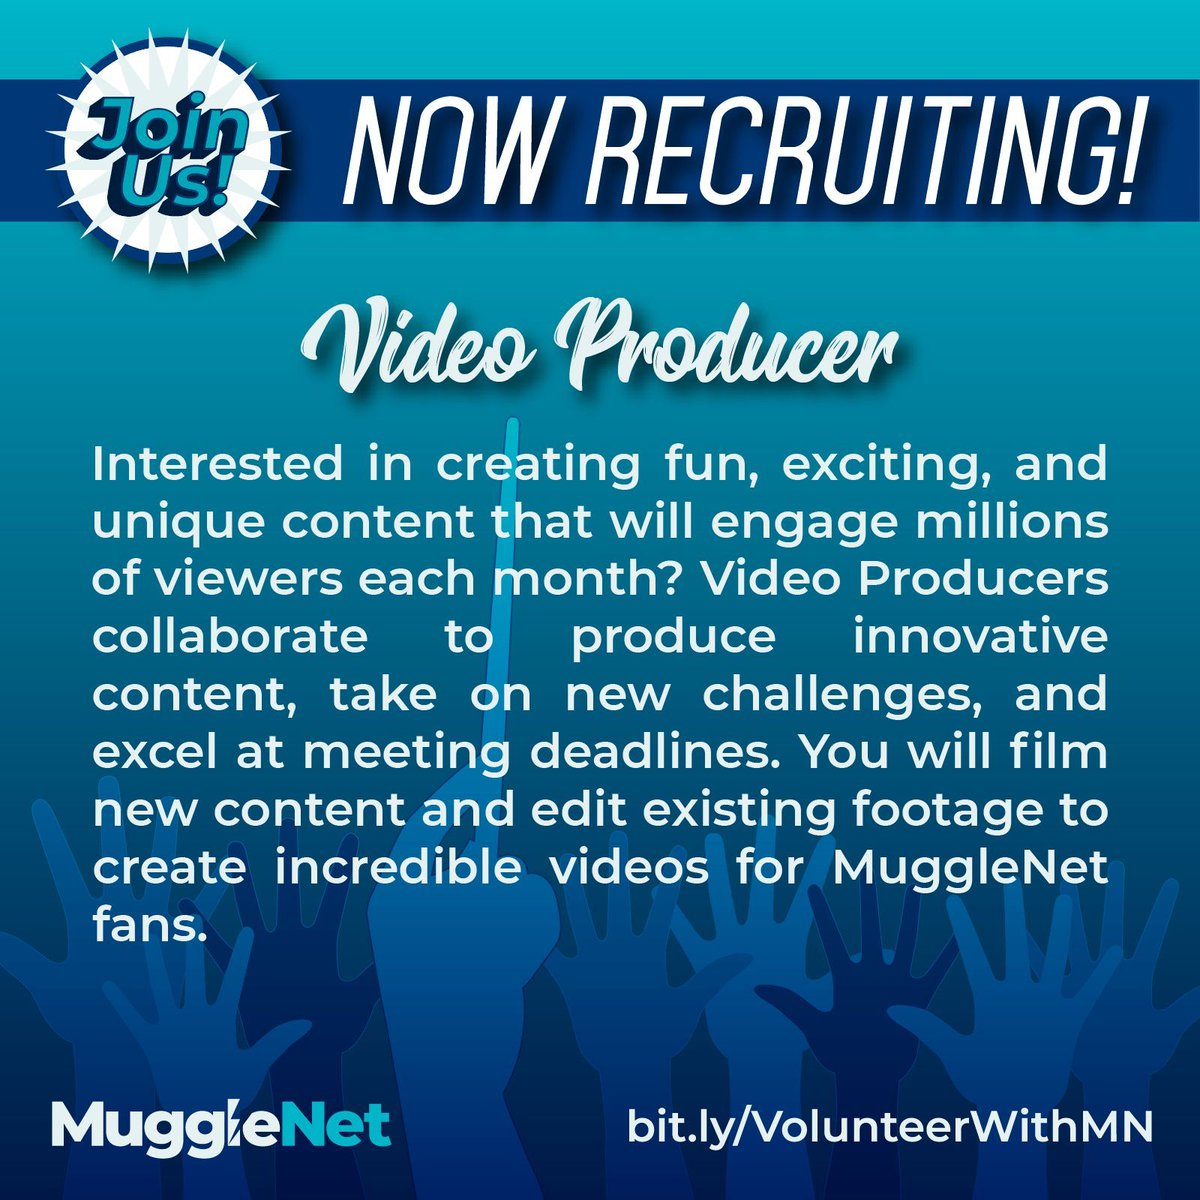 Do you enjoy editing videos? Do you want to make videos that will be seen all over the wizarding world? Join our team today! 🎥⚡ #VolunteerWithMuggleNet

mugglenet.com/site/volunteer/